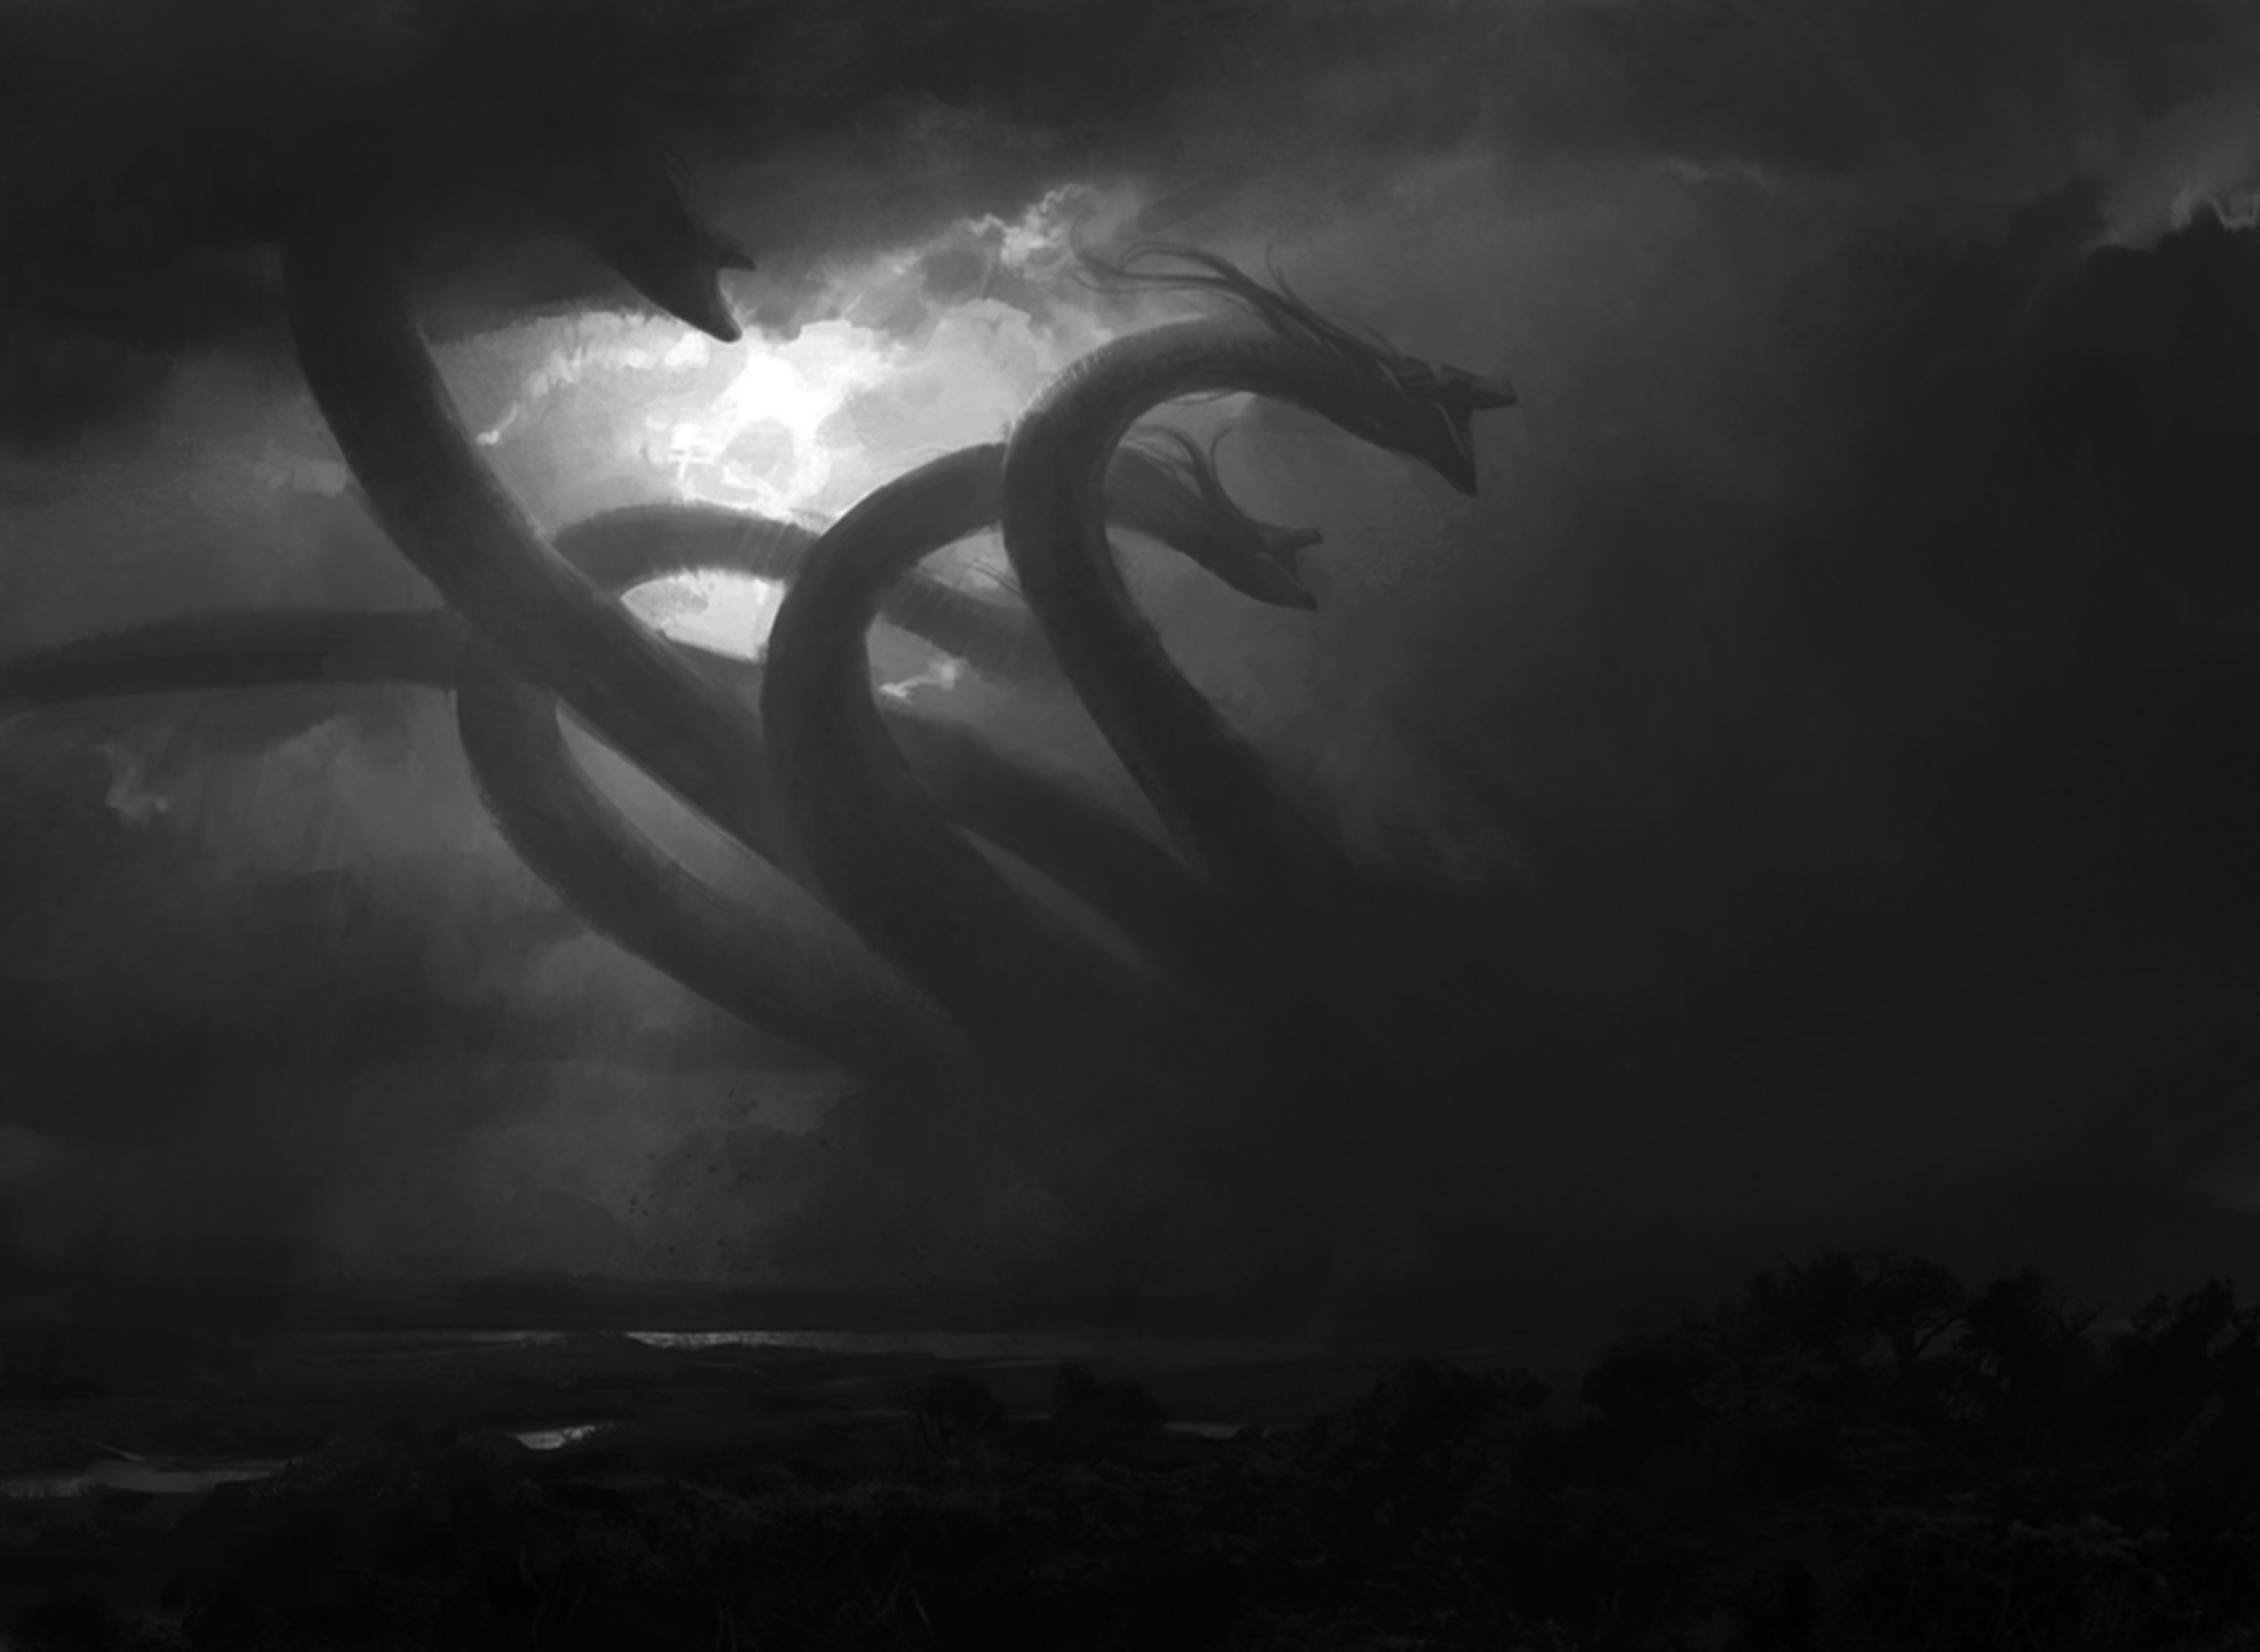 hydra magic the gathering, nature, plant, no people, silhouette